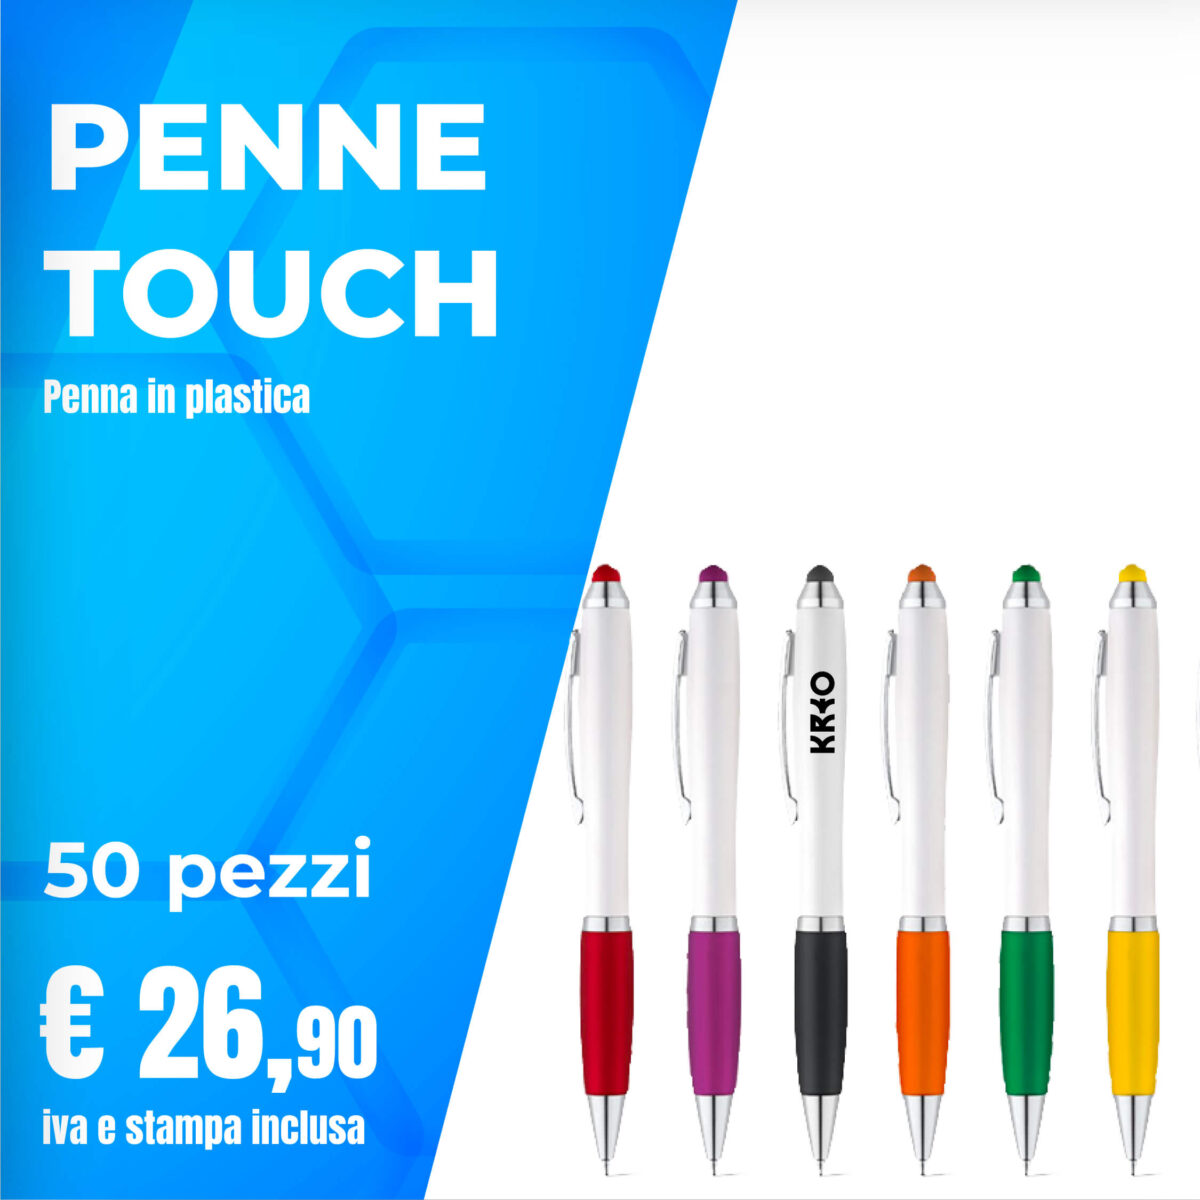 Penne Touch kit 50 pezzi